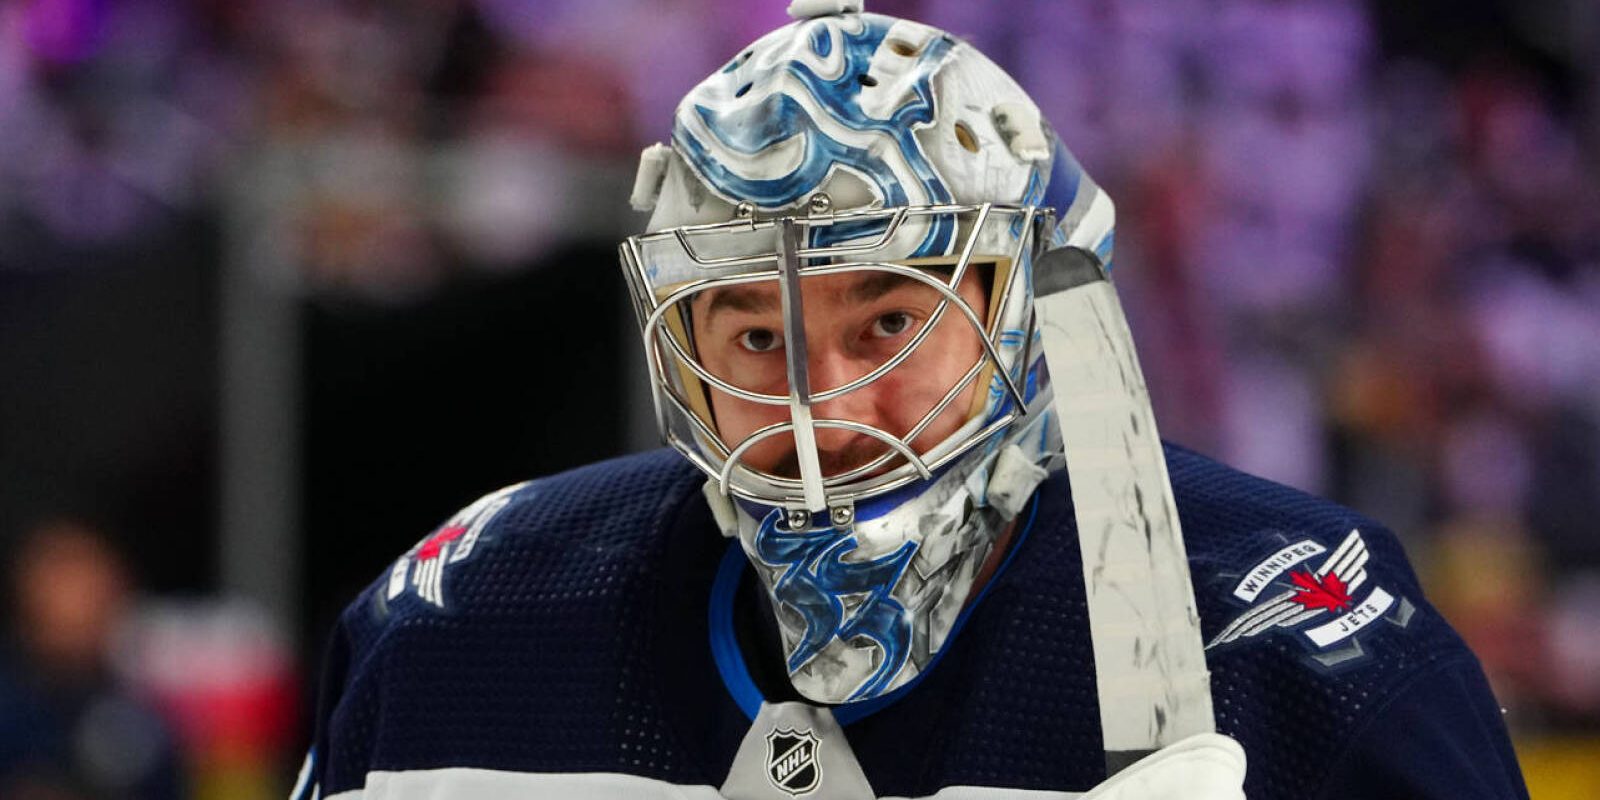 Apr 20, 2023; Las Vegas, Nevada, USA; Winnipeg Jets goaltender David Rittich (33) warms up before the start of game two of the first round of the 2023 Stanley Cup Playoffs against the Vegas Golden Knights at T-Mobile Arena. Mandatory Credit: Stephen R. Sylvanie-USA TODAY Sports